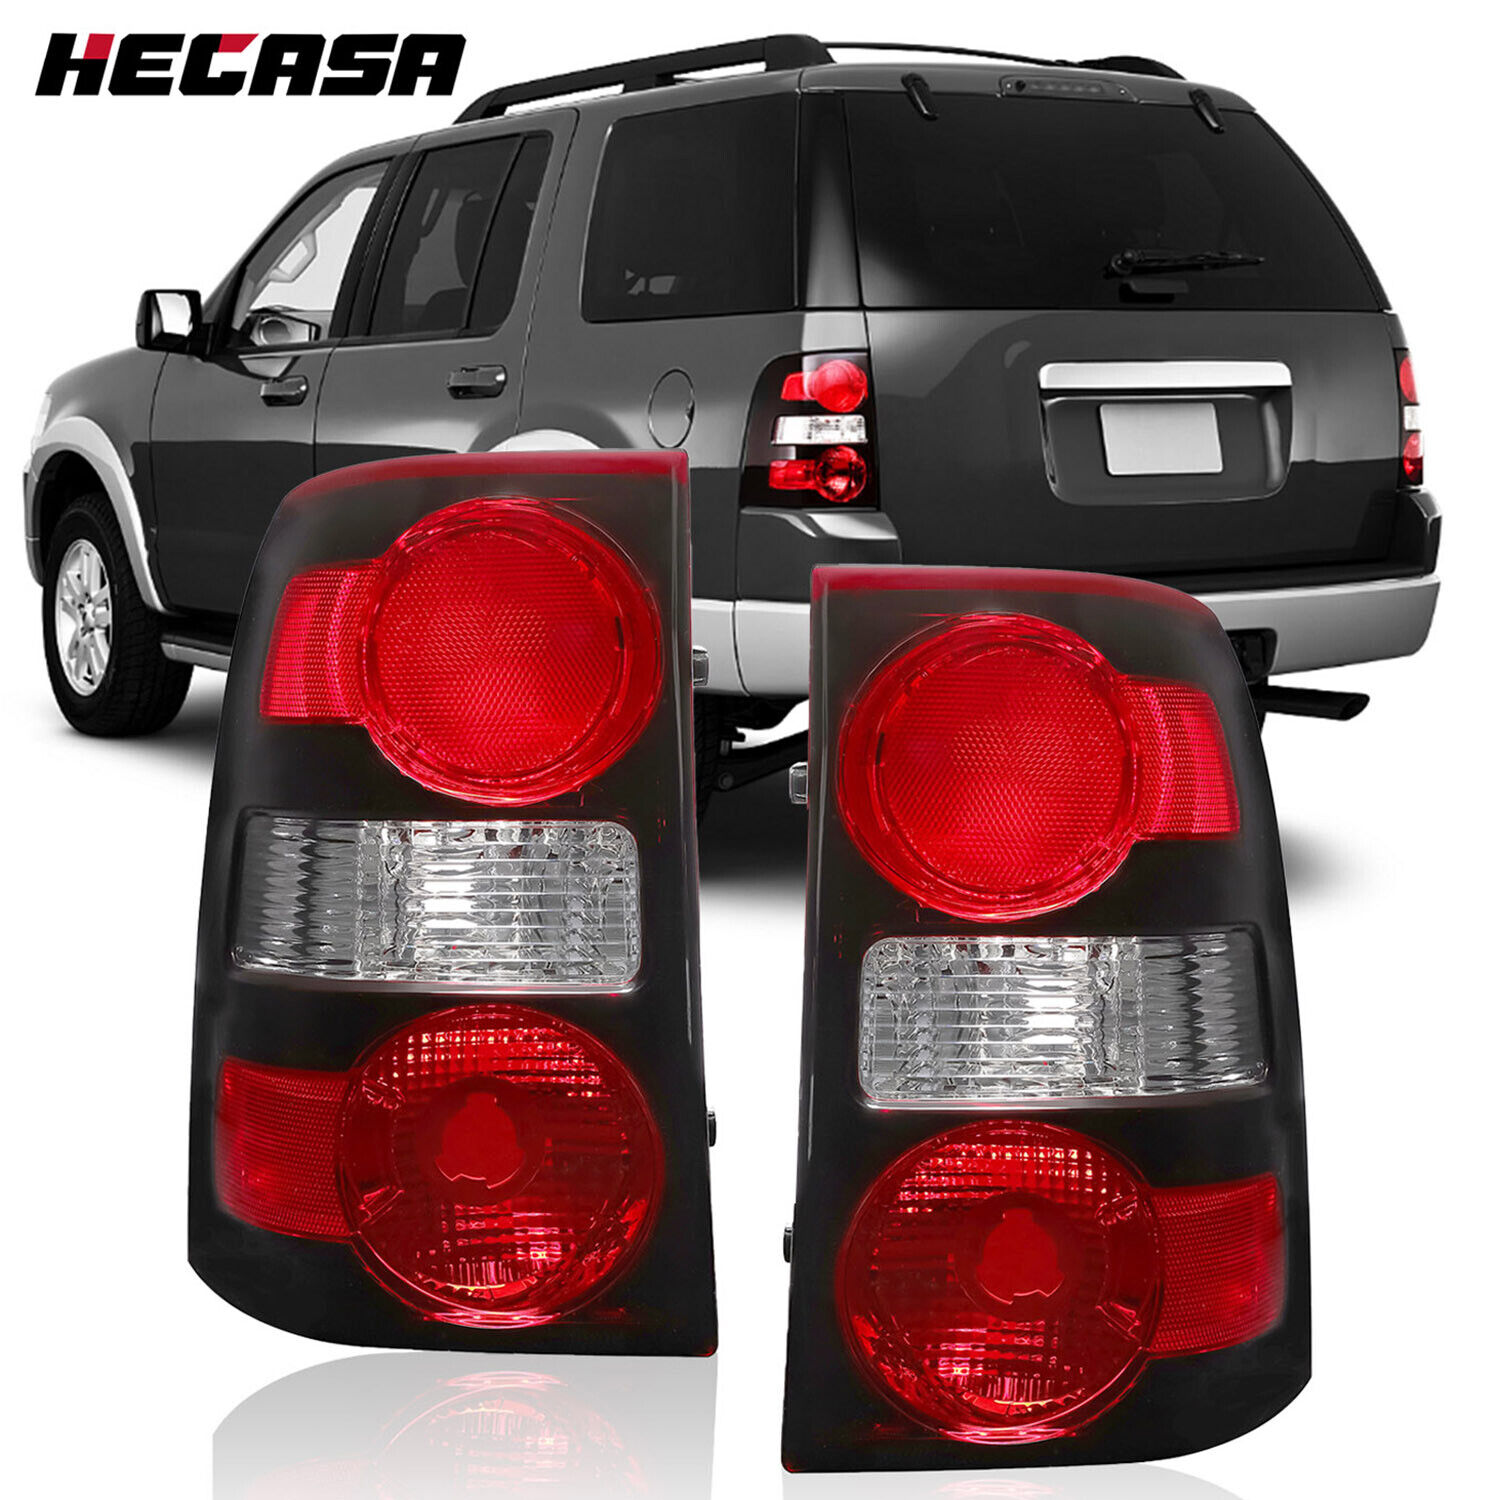 2Pcs New Halogen Tail Lights Lamps Fit 2006-2010 Ford Explorer Clear & Red Lens